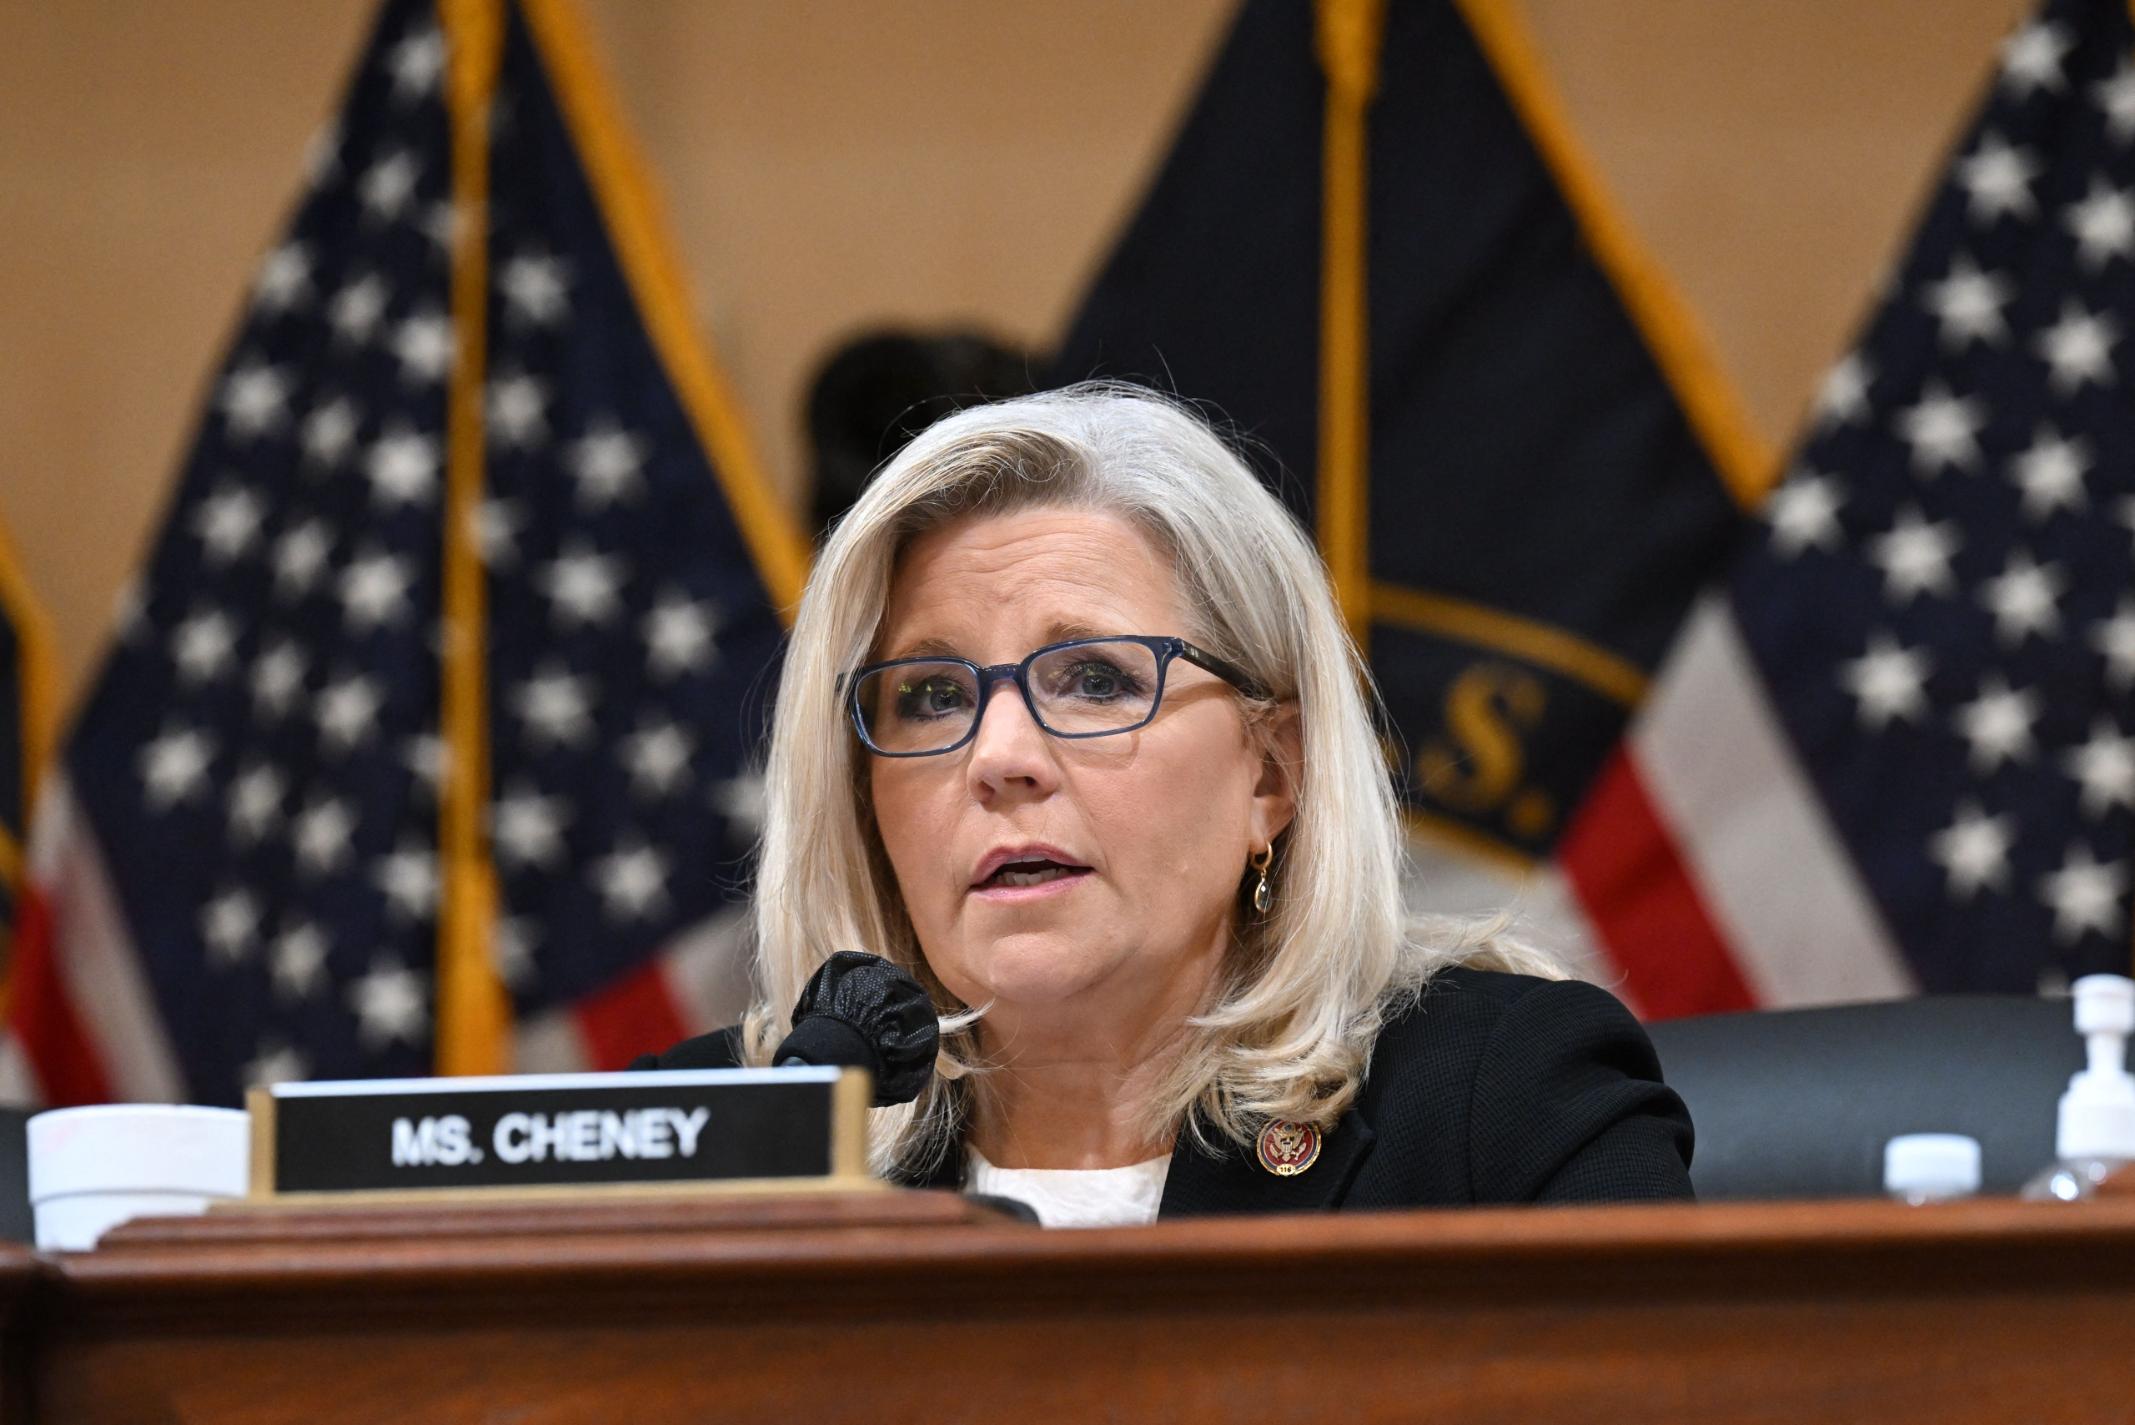 Liz Cheney just made an absolutely critical point about Donald Trump’s responsibility on January 6